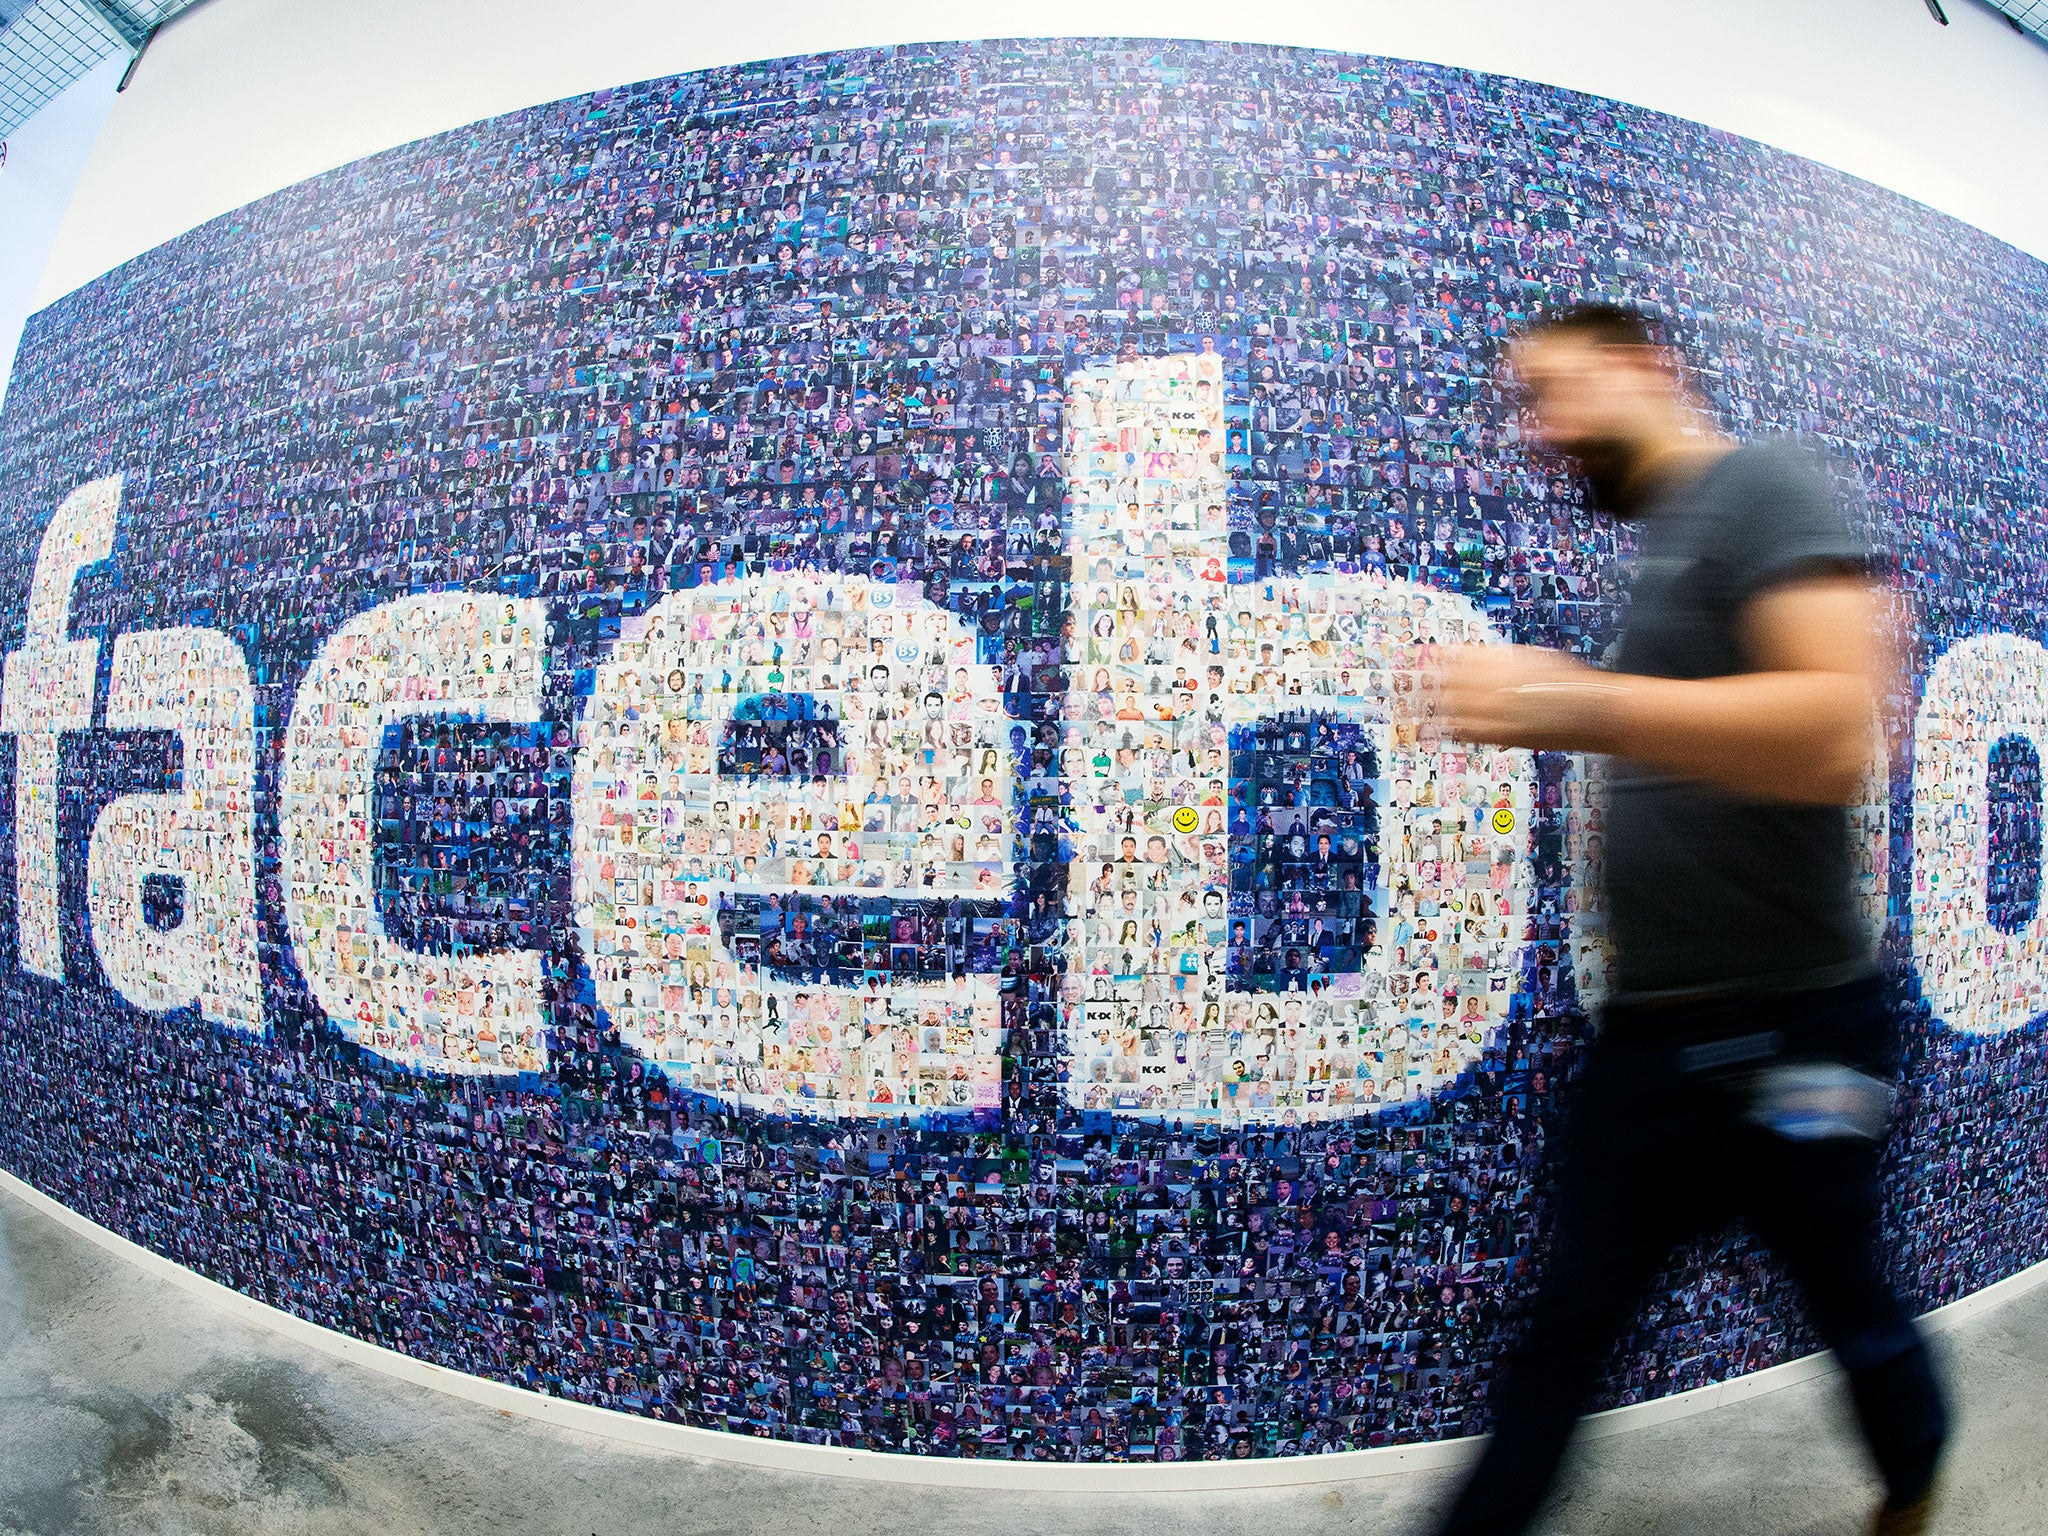 Facebook previously routed profits through its Dublin office.